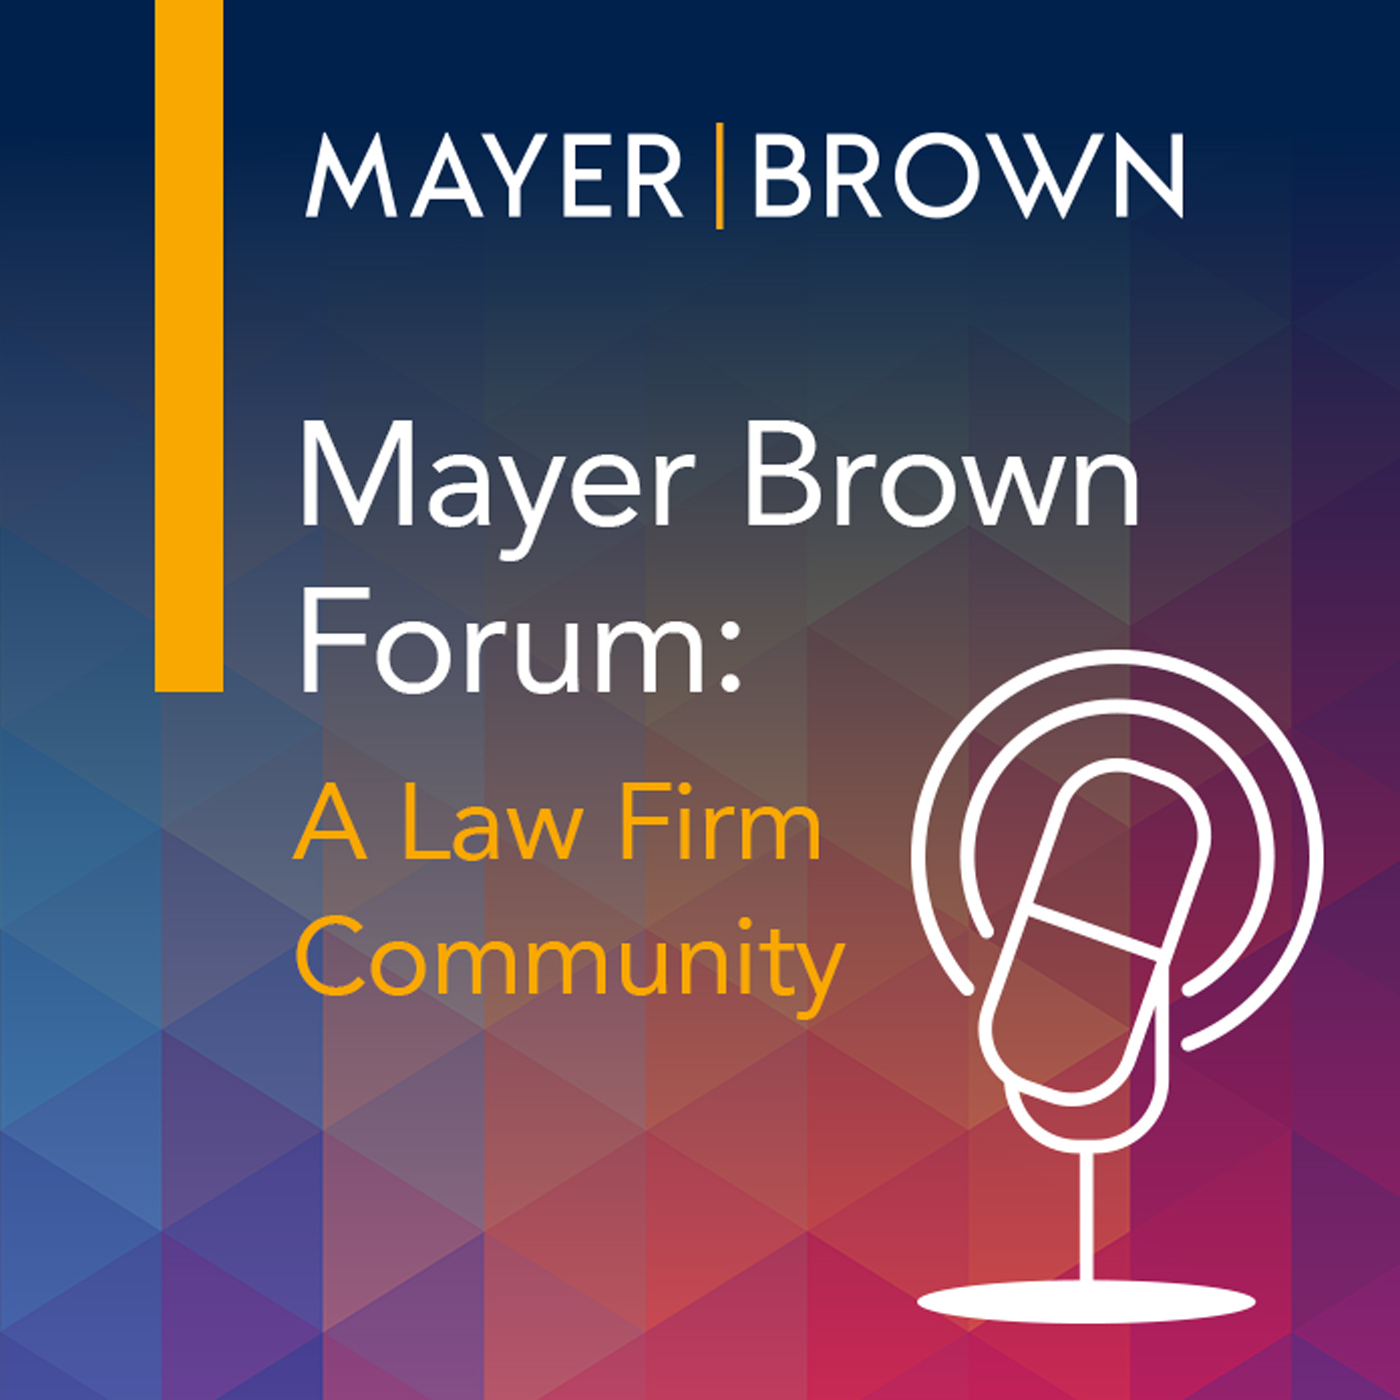 Mayer Brown Forum: A Law Firm Community